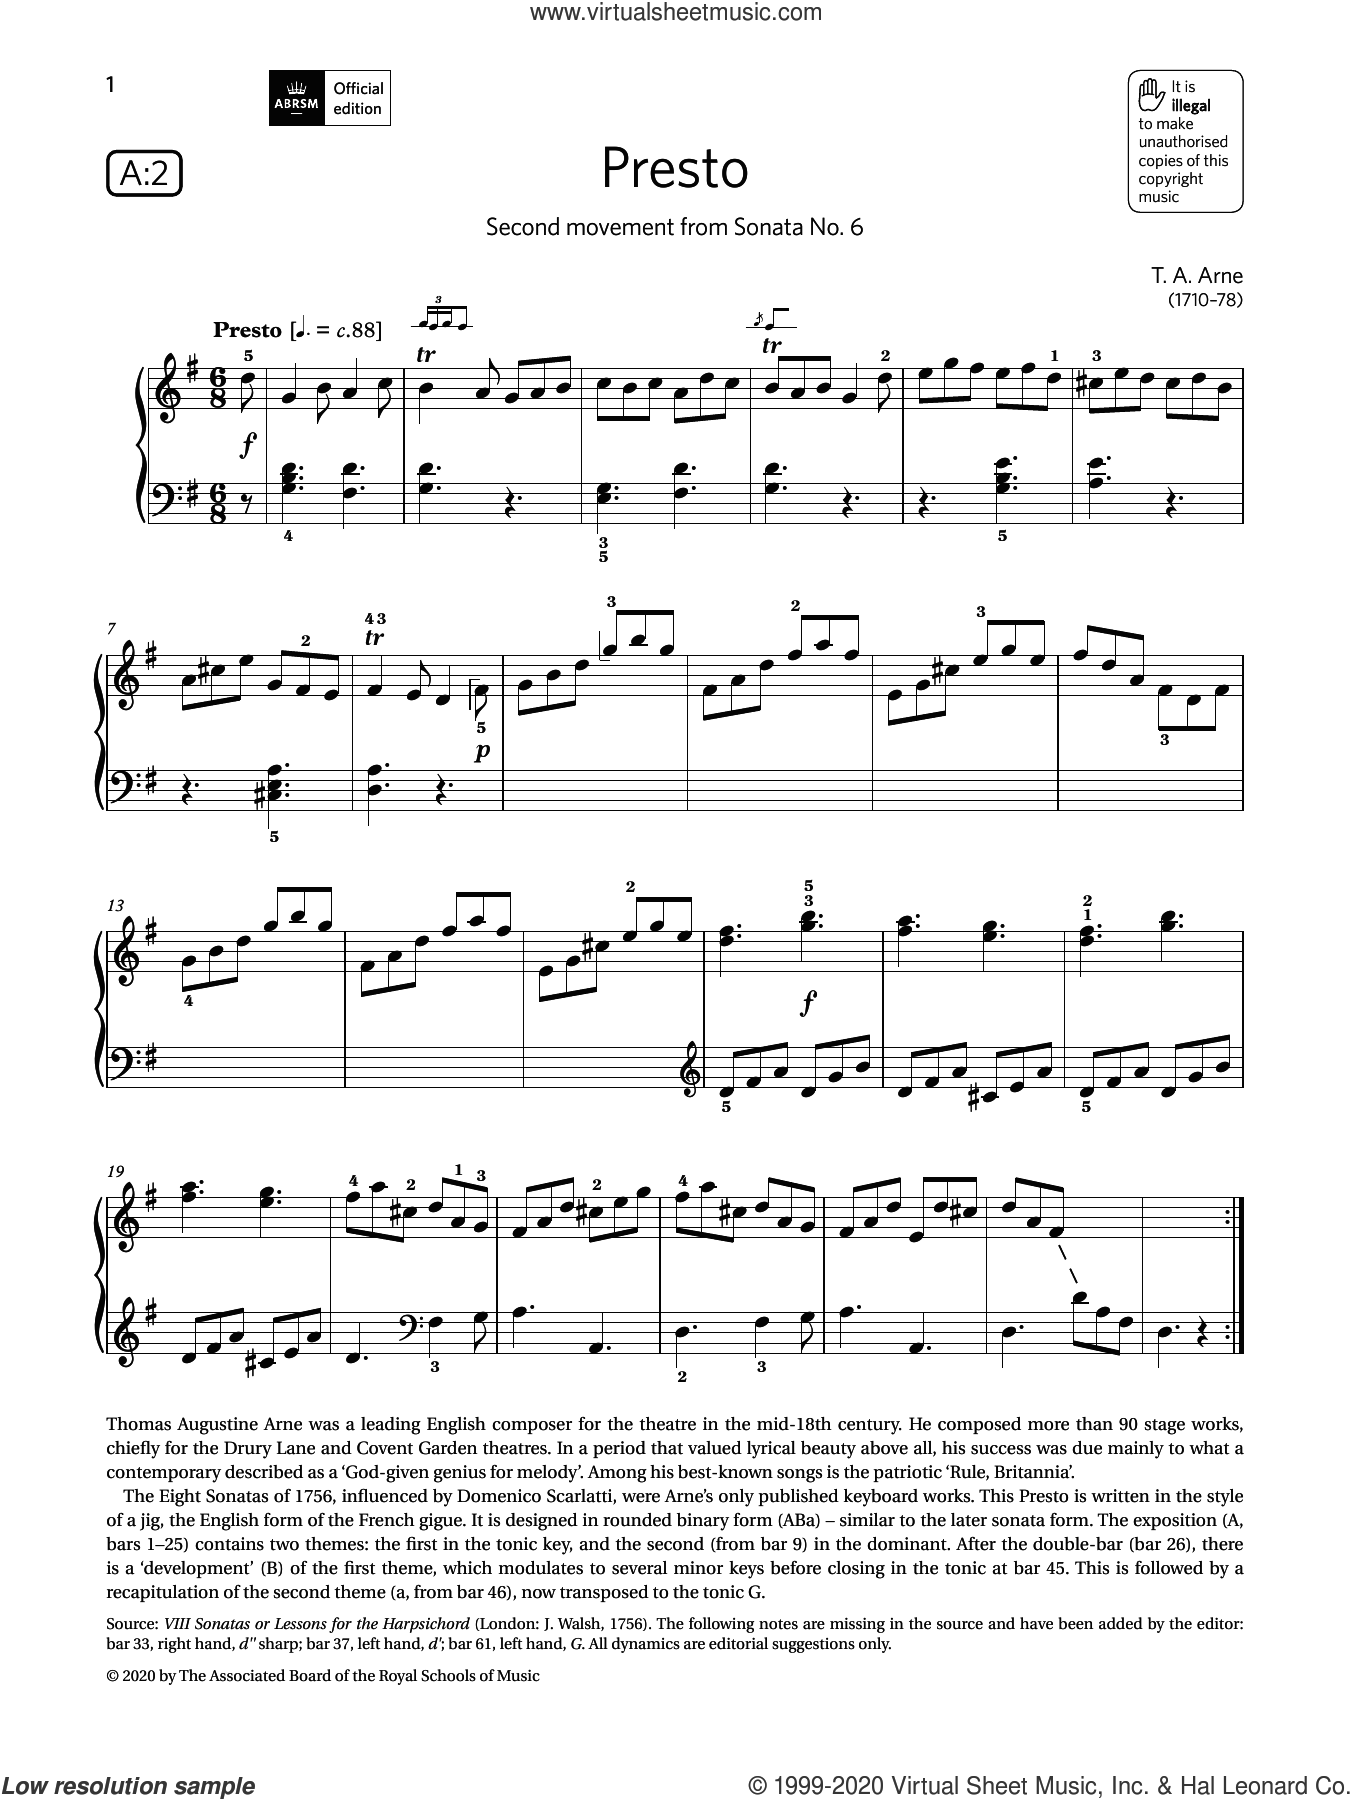 Arne - Presto (Grade 5, list A2, from the ABRSM Piano Syllabus 2021 and